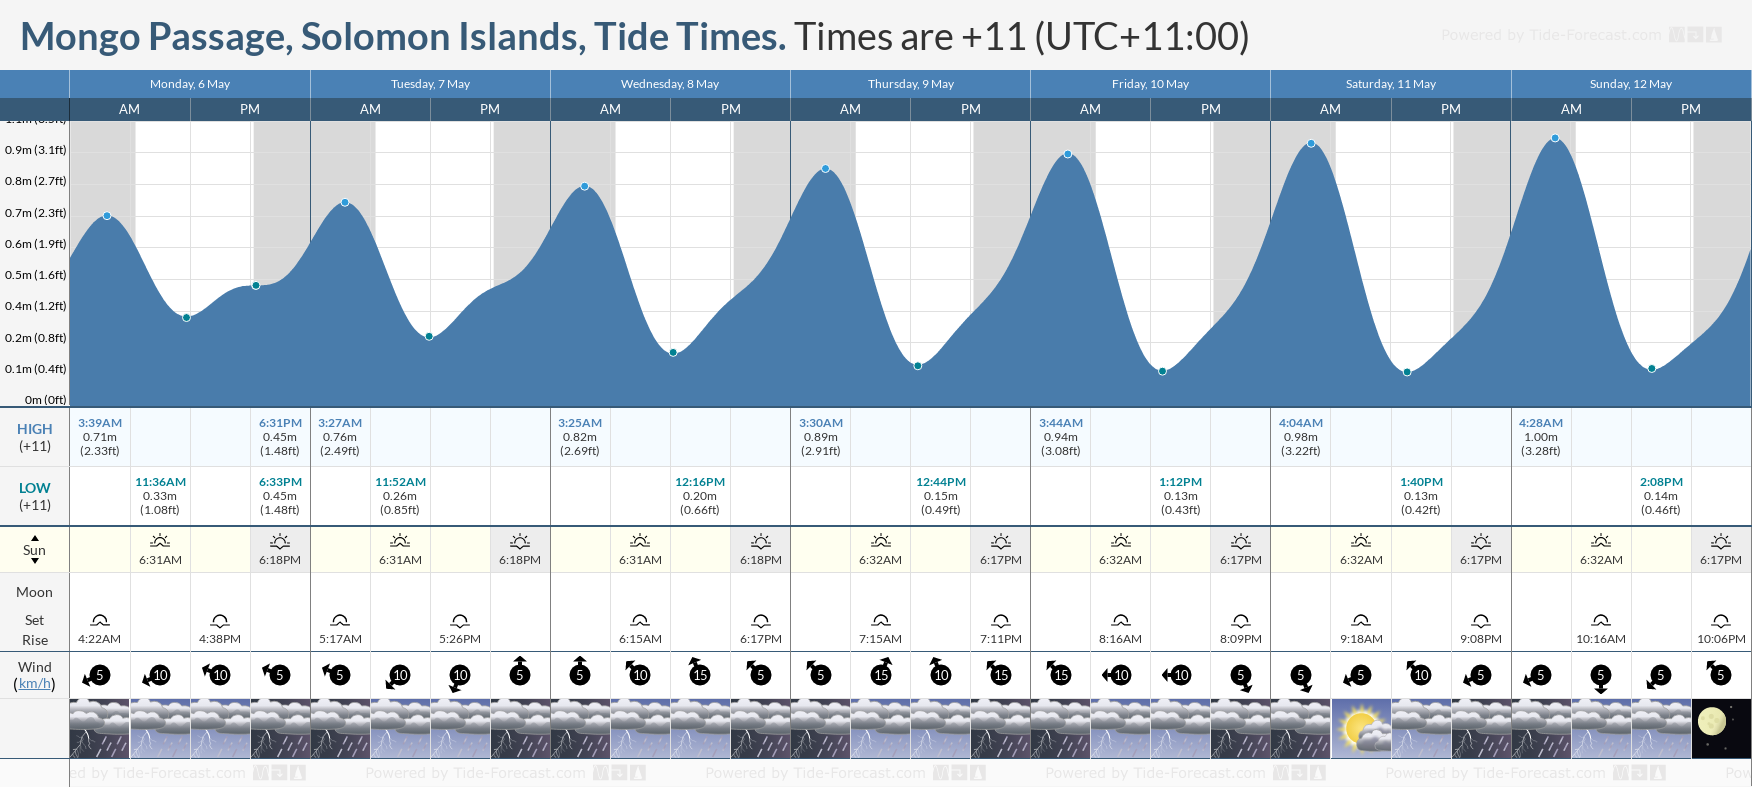 Mongo Passage, Solomon Islands Tide Chart including high and low tide tide times for the next 7 days